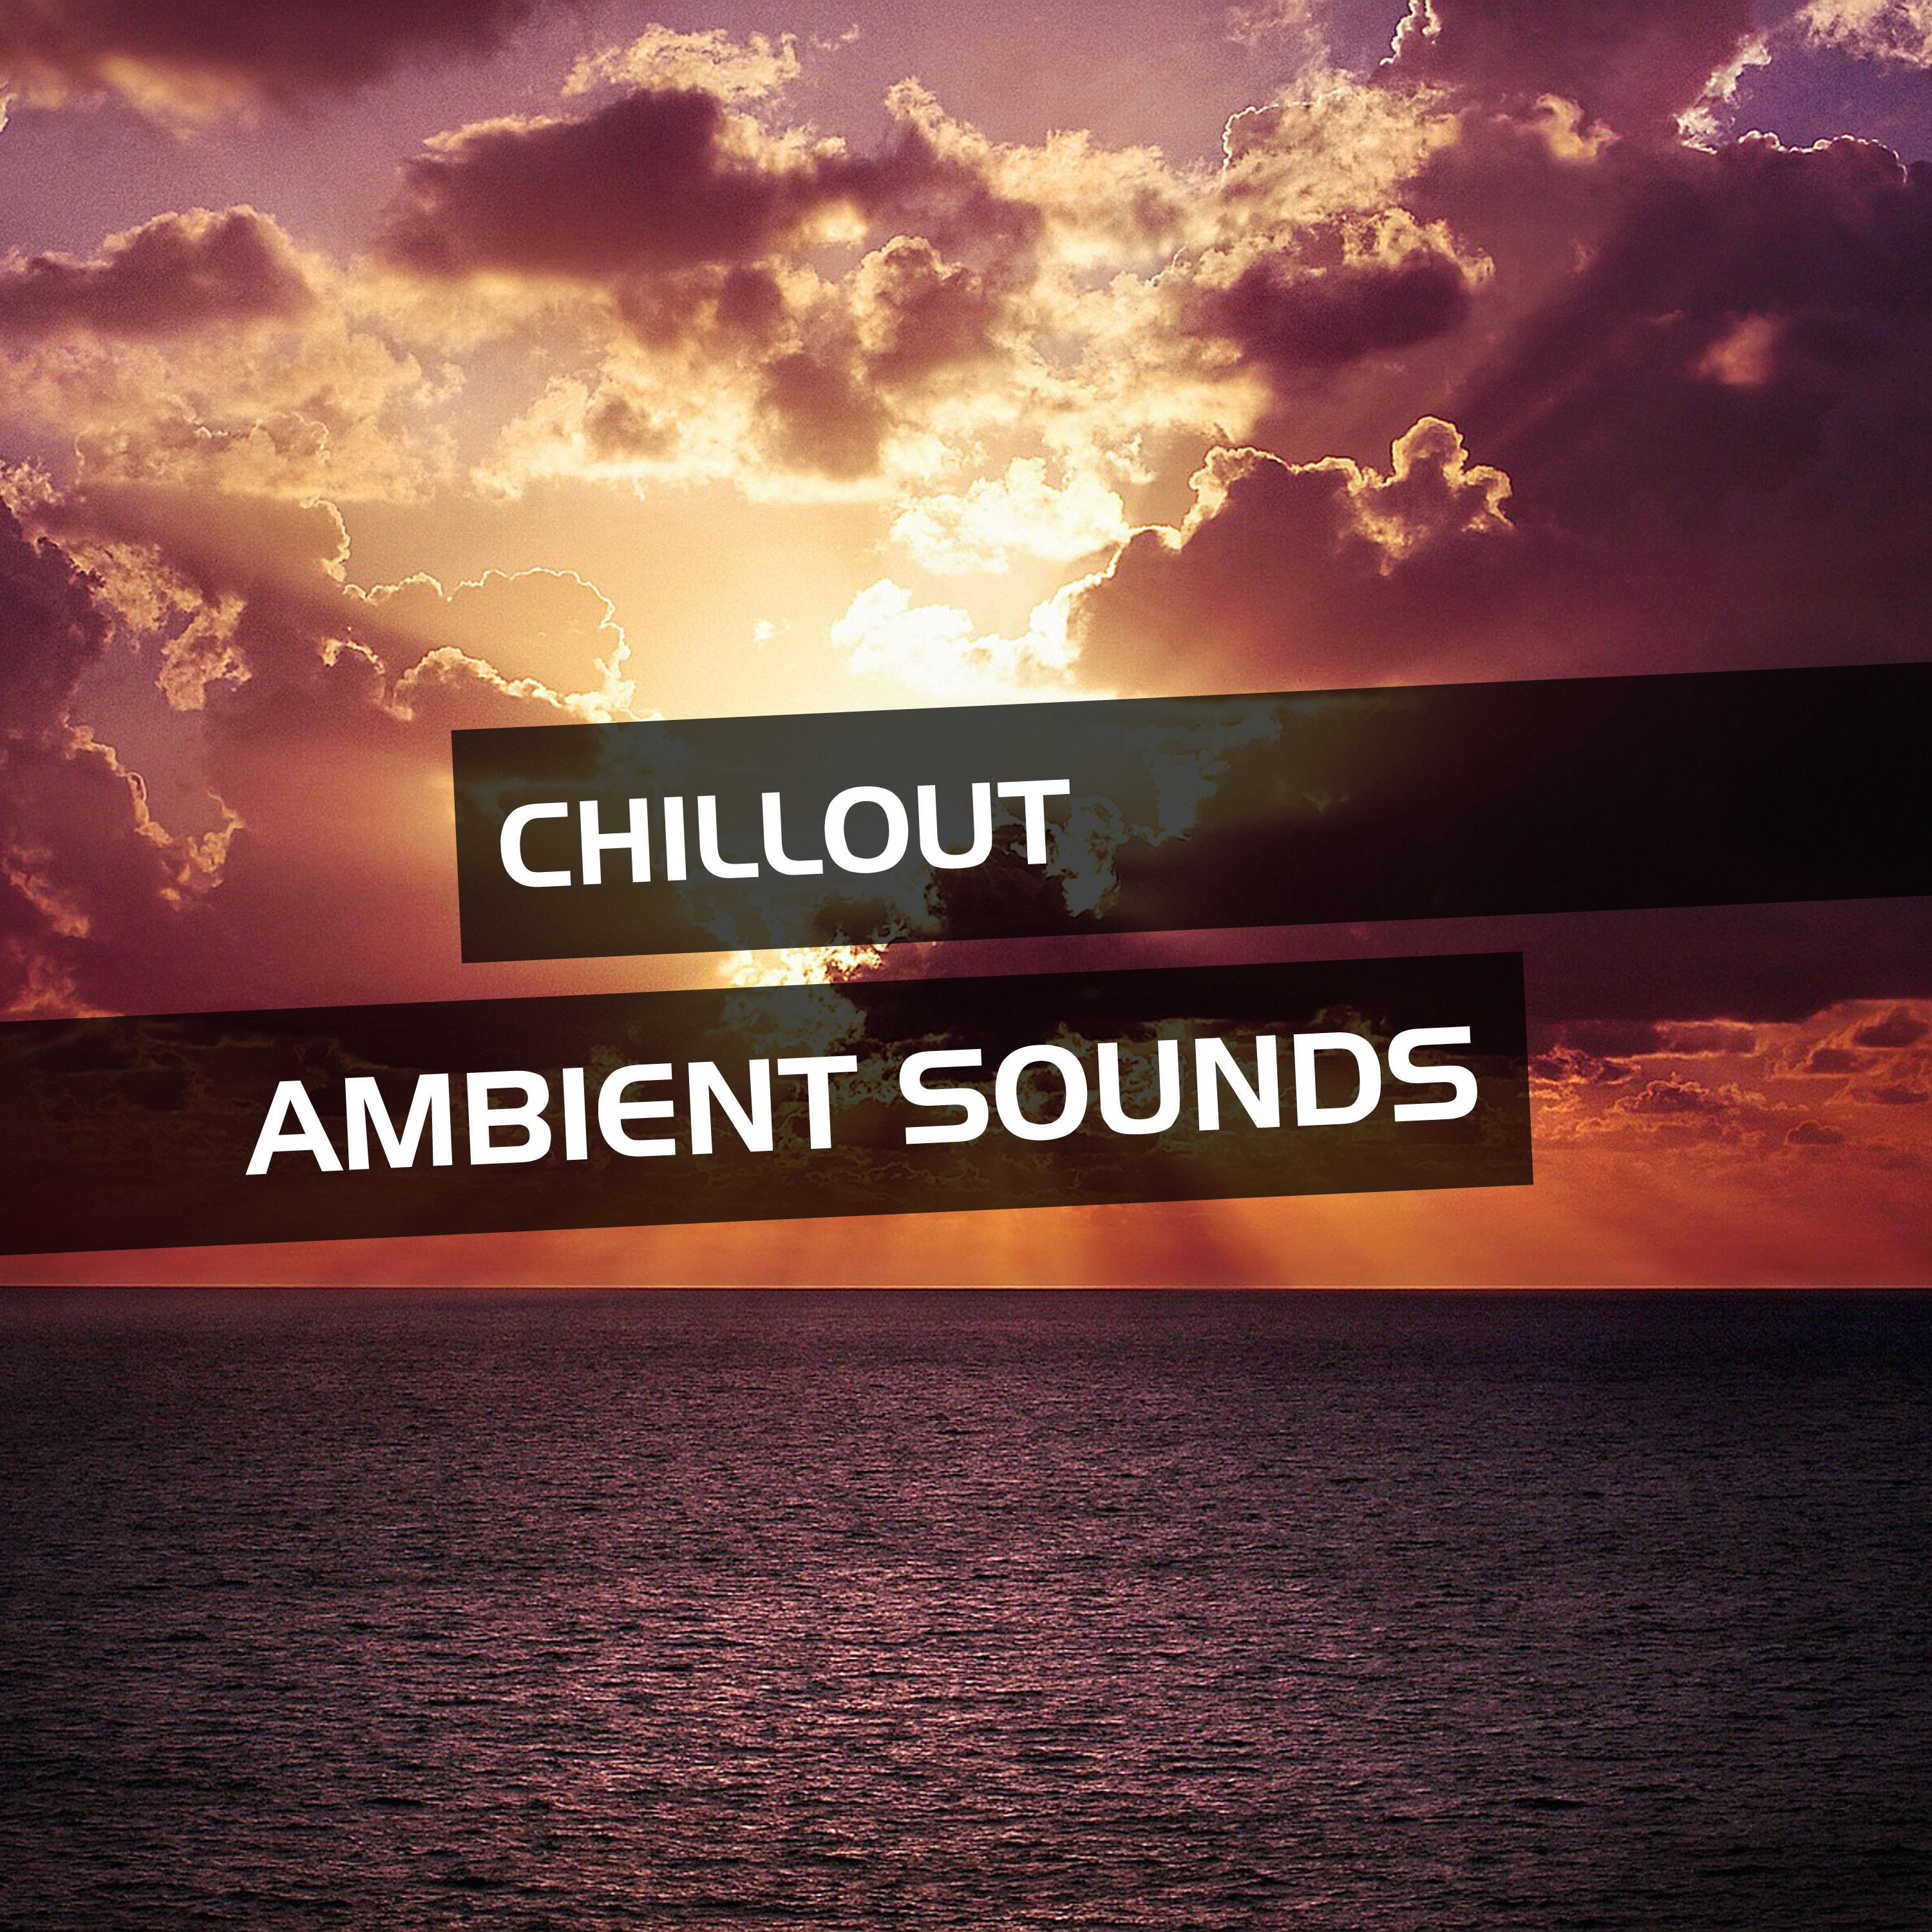 Chillout Ambient Sounds